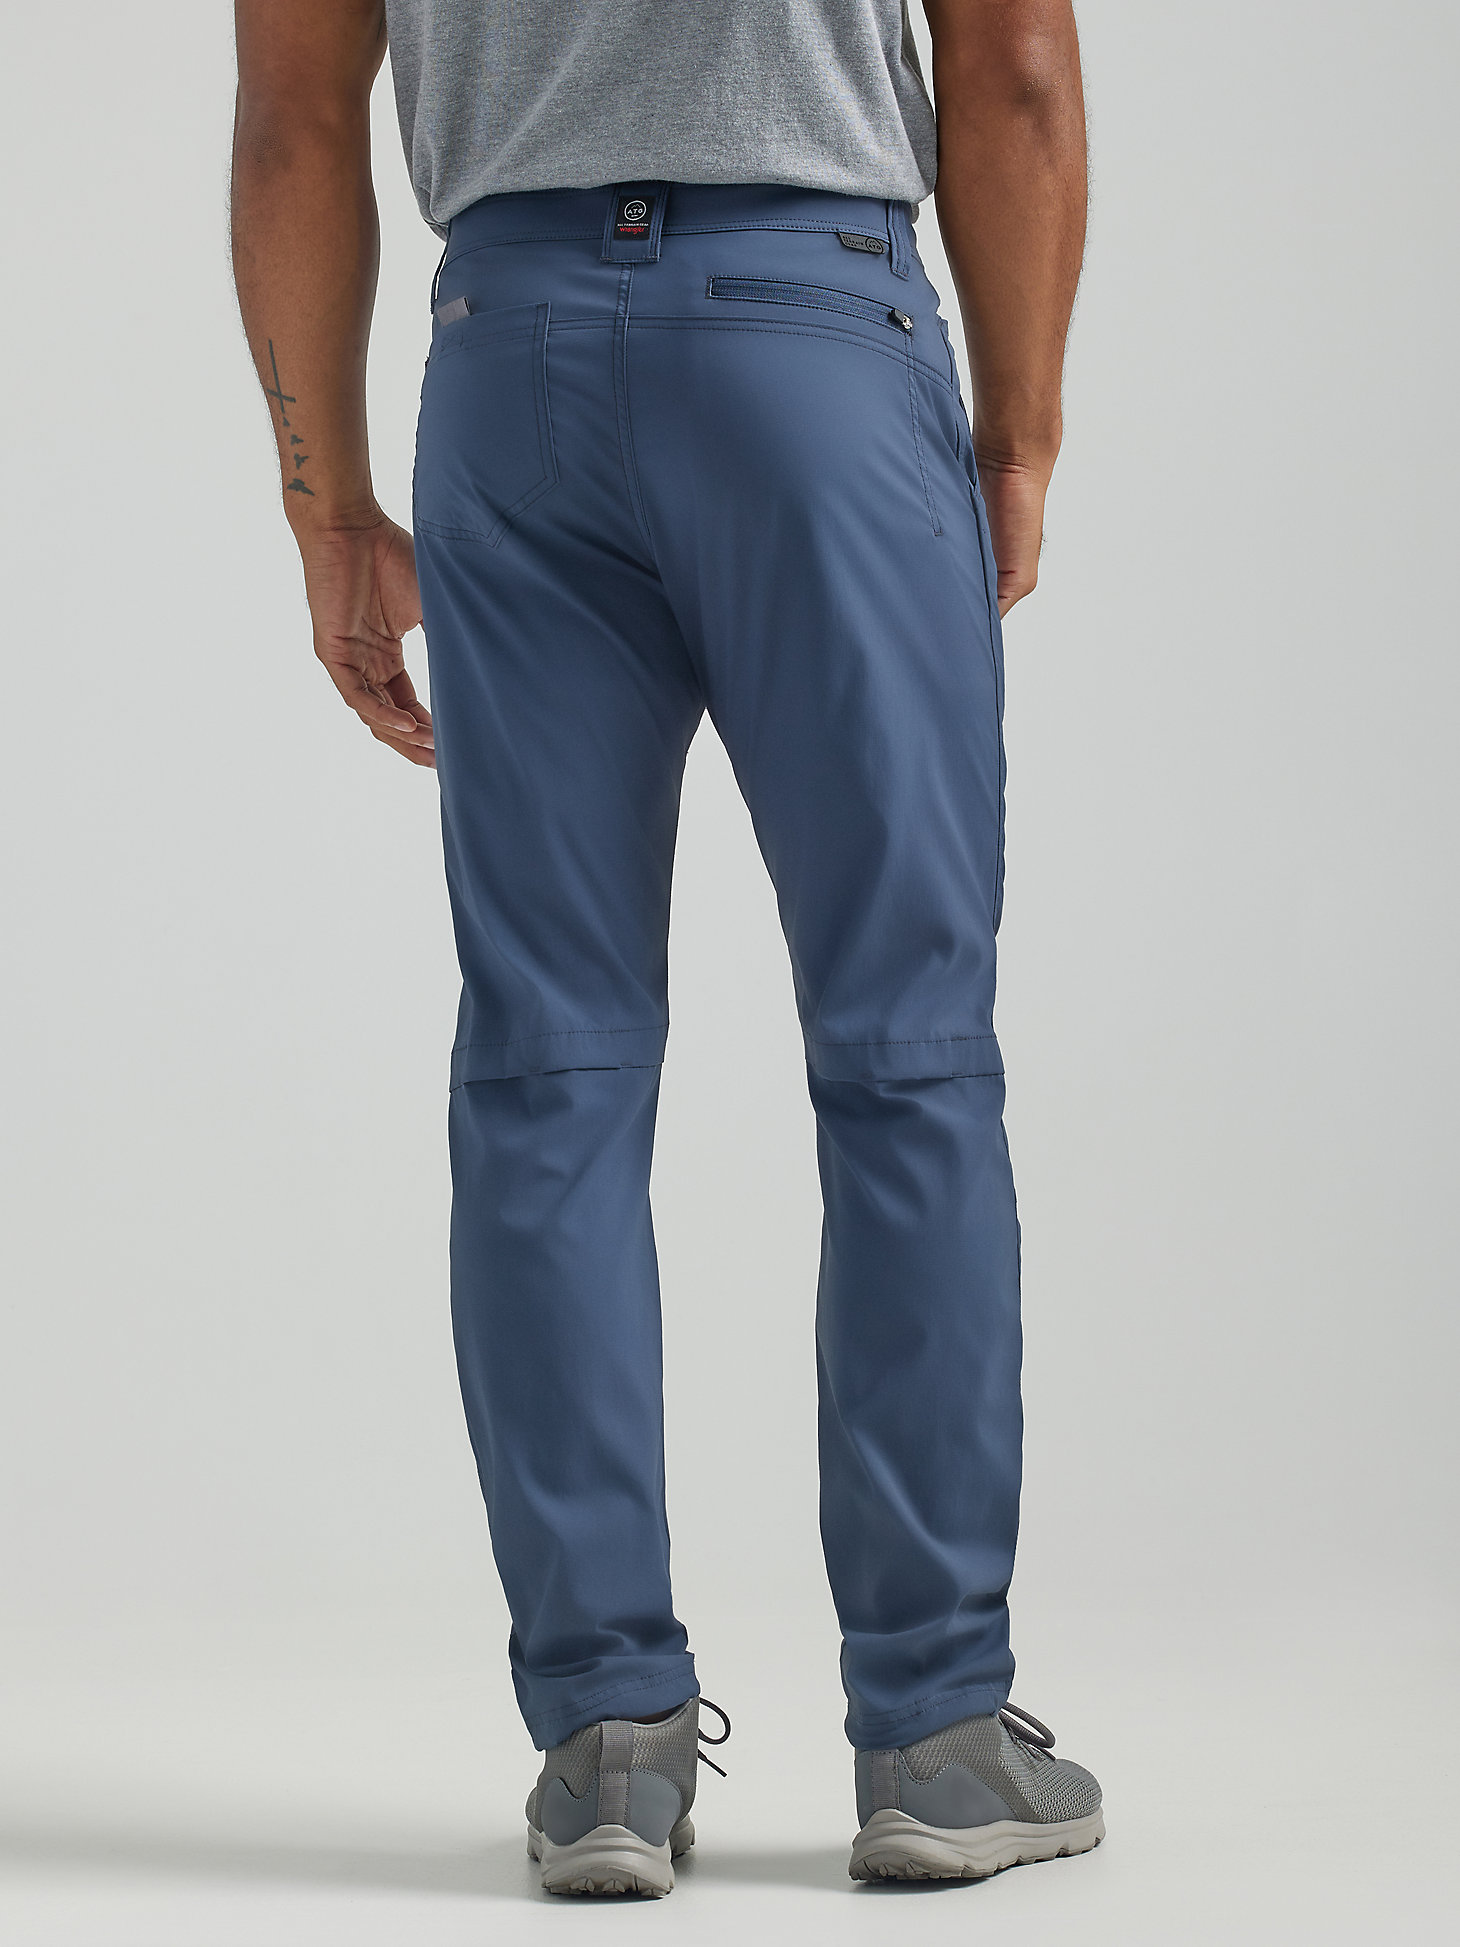 ATG by Wrangler™ Men's Convertible Trail Jogger in Blue Nights alternative view 1